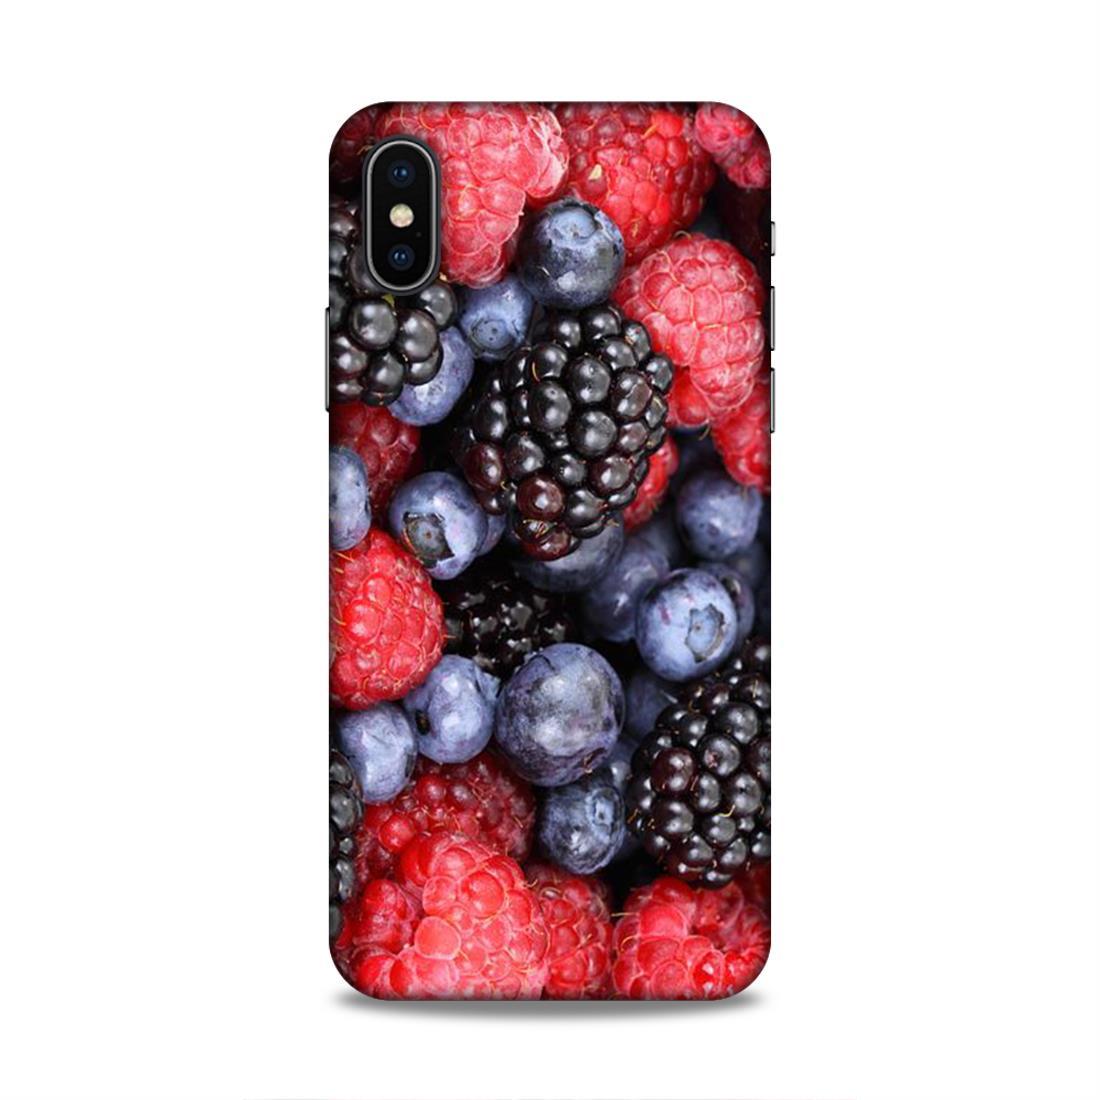 MultiFruits Love iPhone X Mobile Back Case